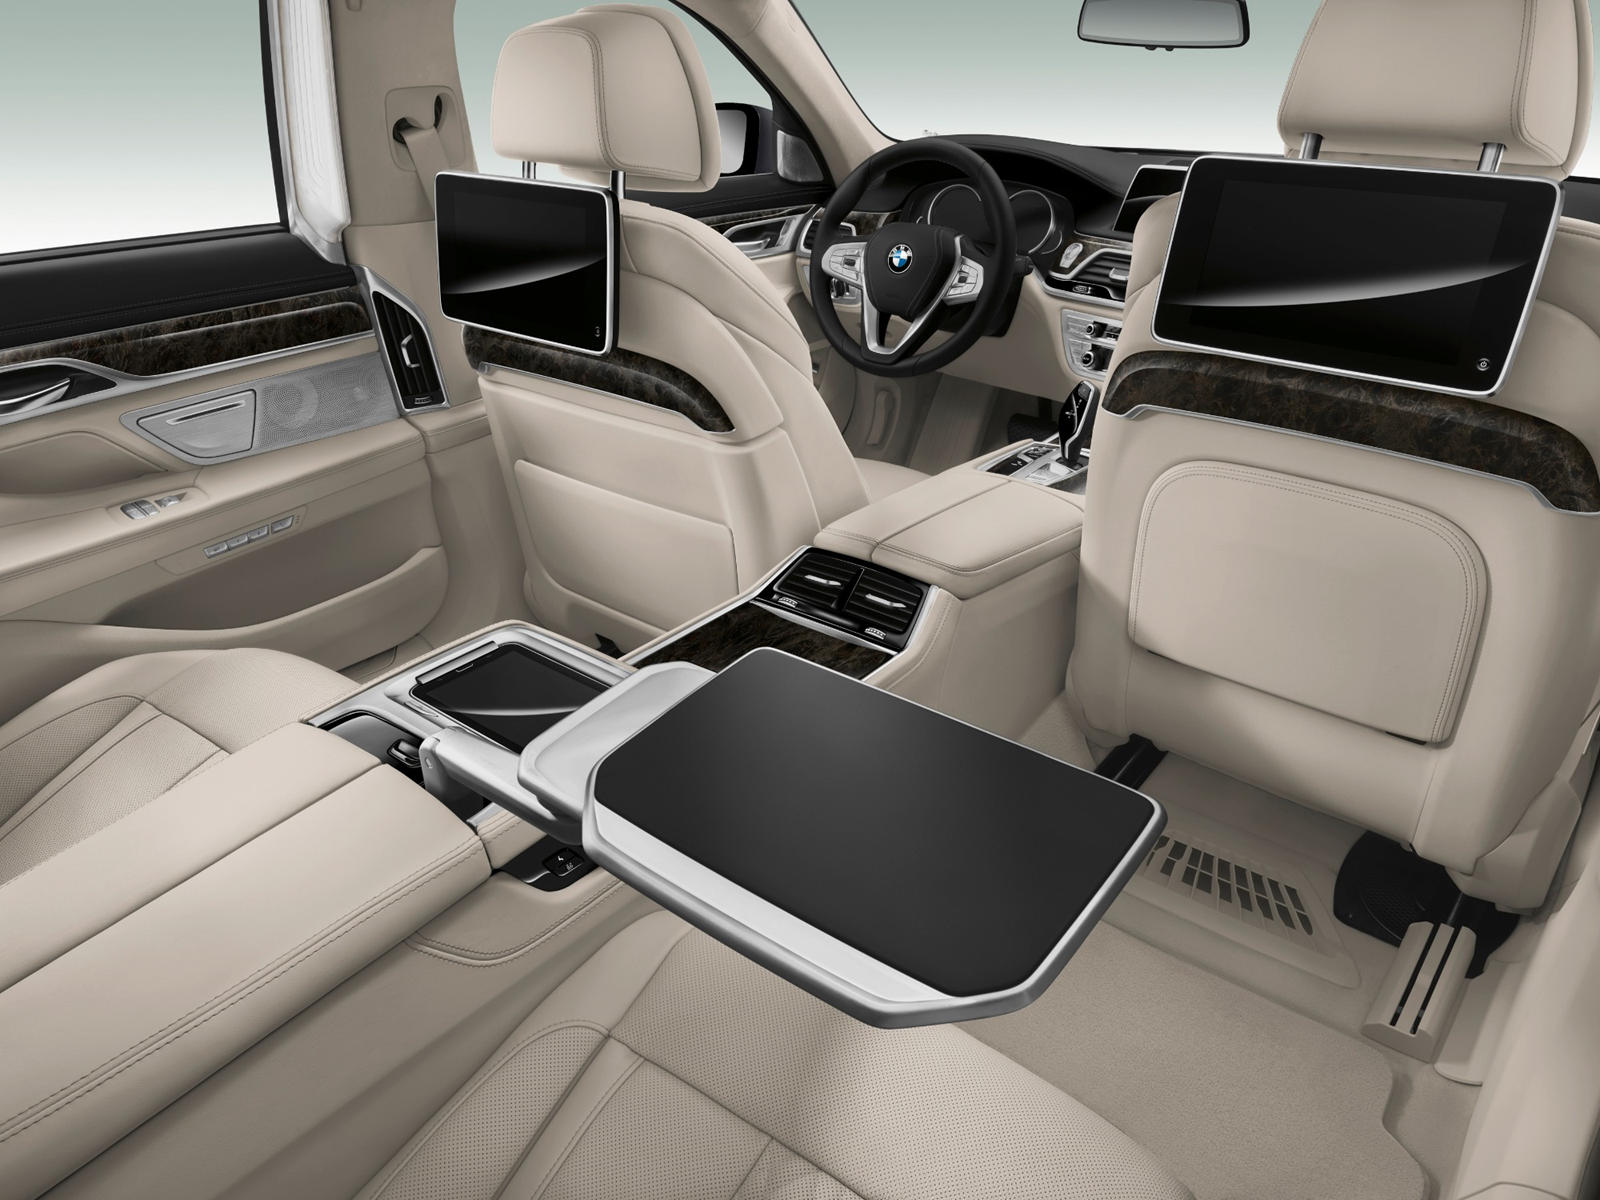 2019 BMW 7 Series Interior Dimensions: Seating, Cargo Space & Trunk Size -  Photos | CarBuzz